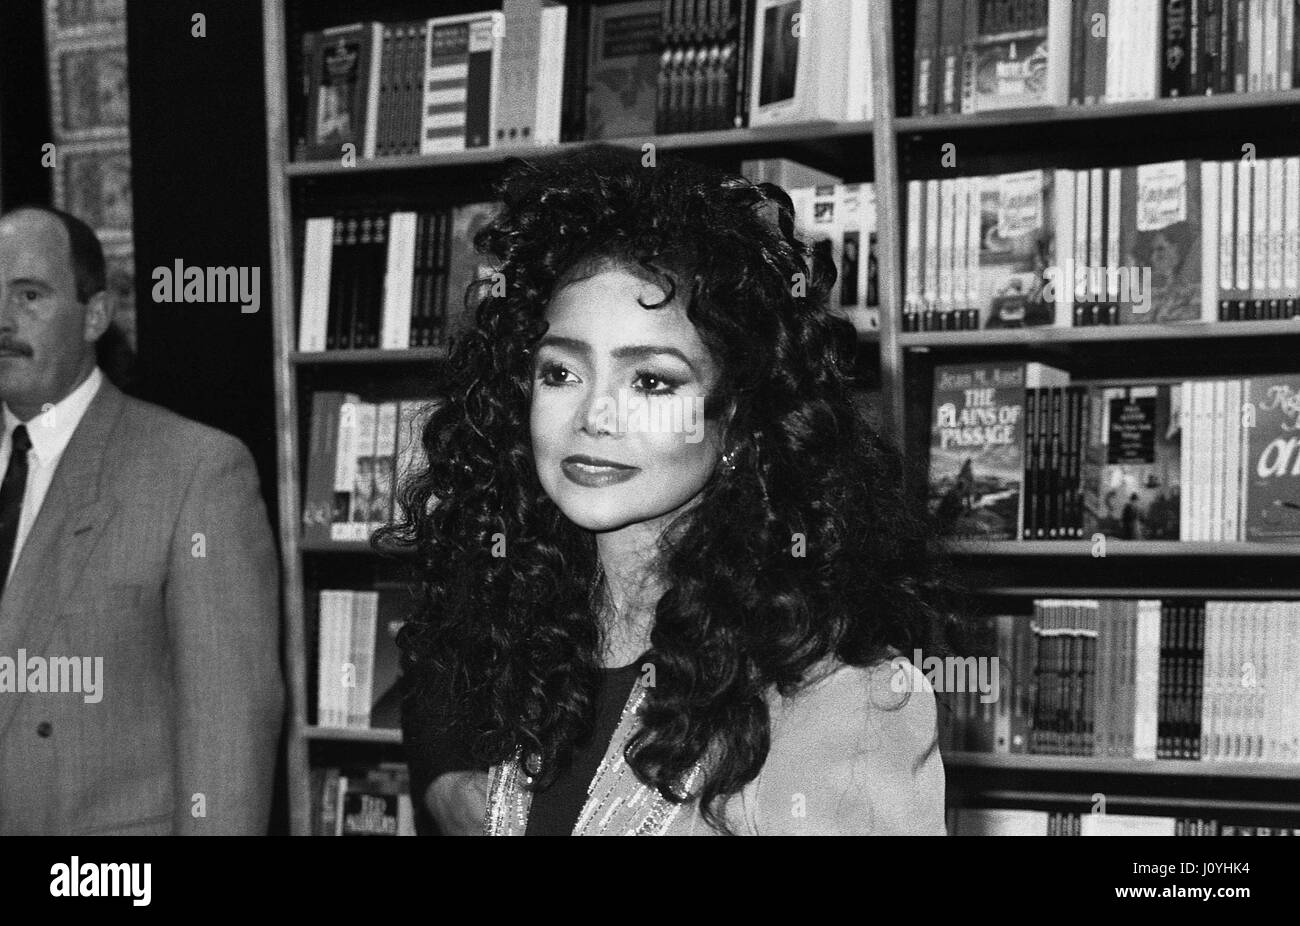 La Toya Jackson, U.S. pop singer and sister of Michael Jackson, attends a book signing event in London, England on September 26, 1991. Stock Photo